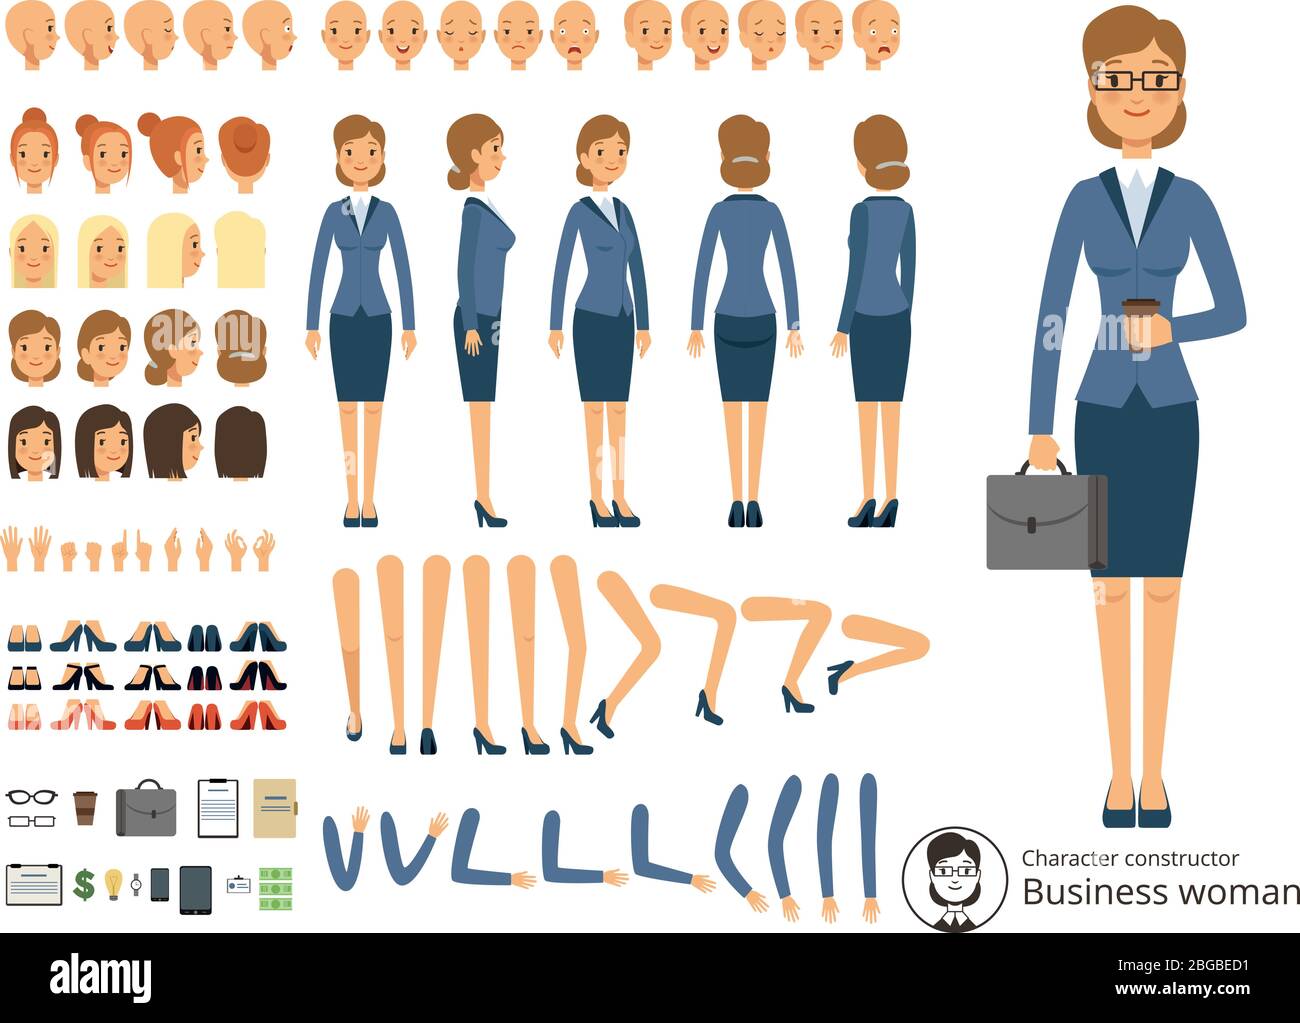 Character constructor of business woman. Cartoon vector illustrations ...